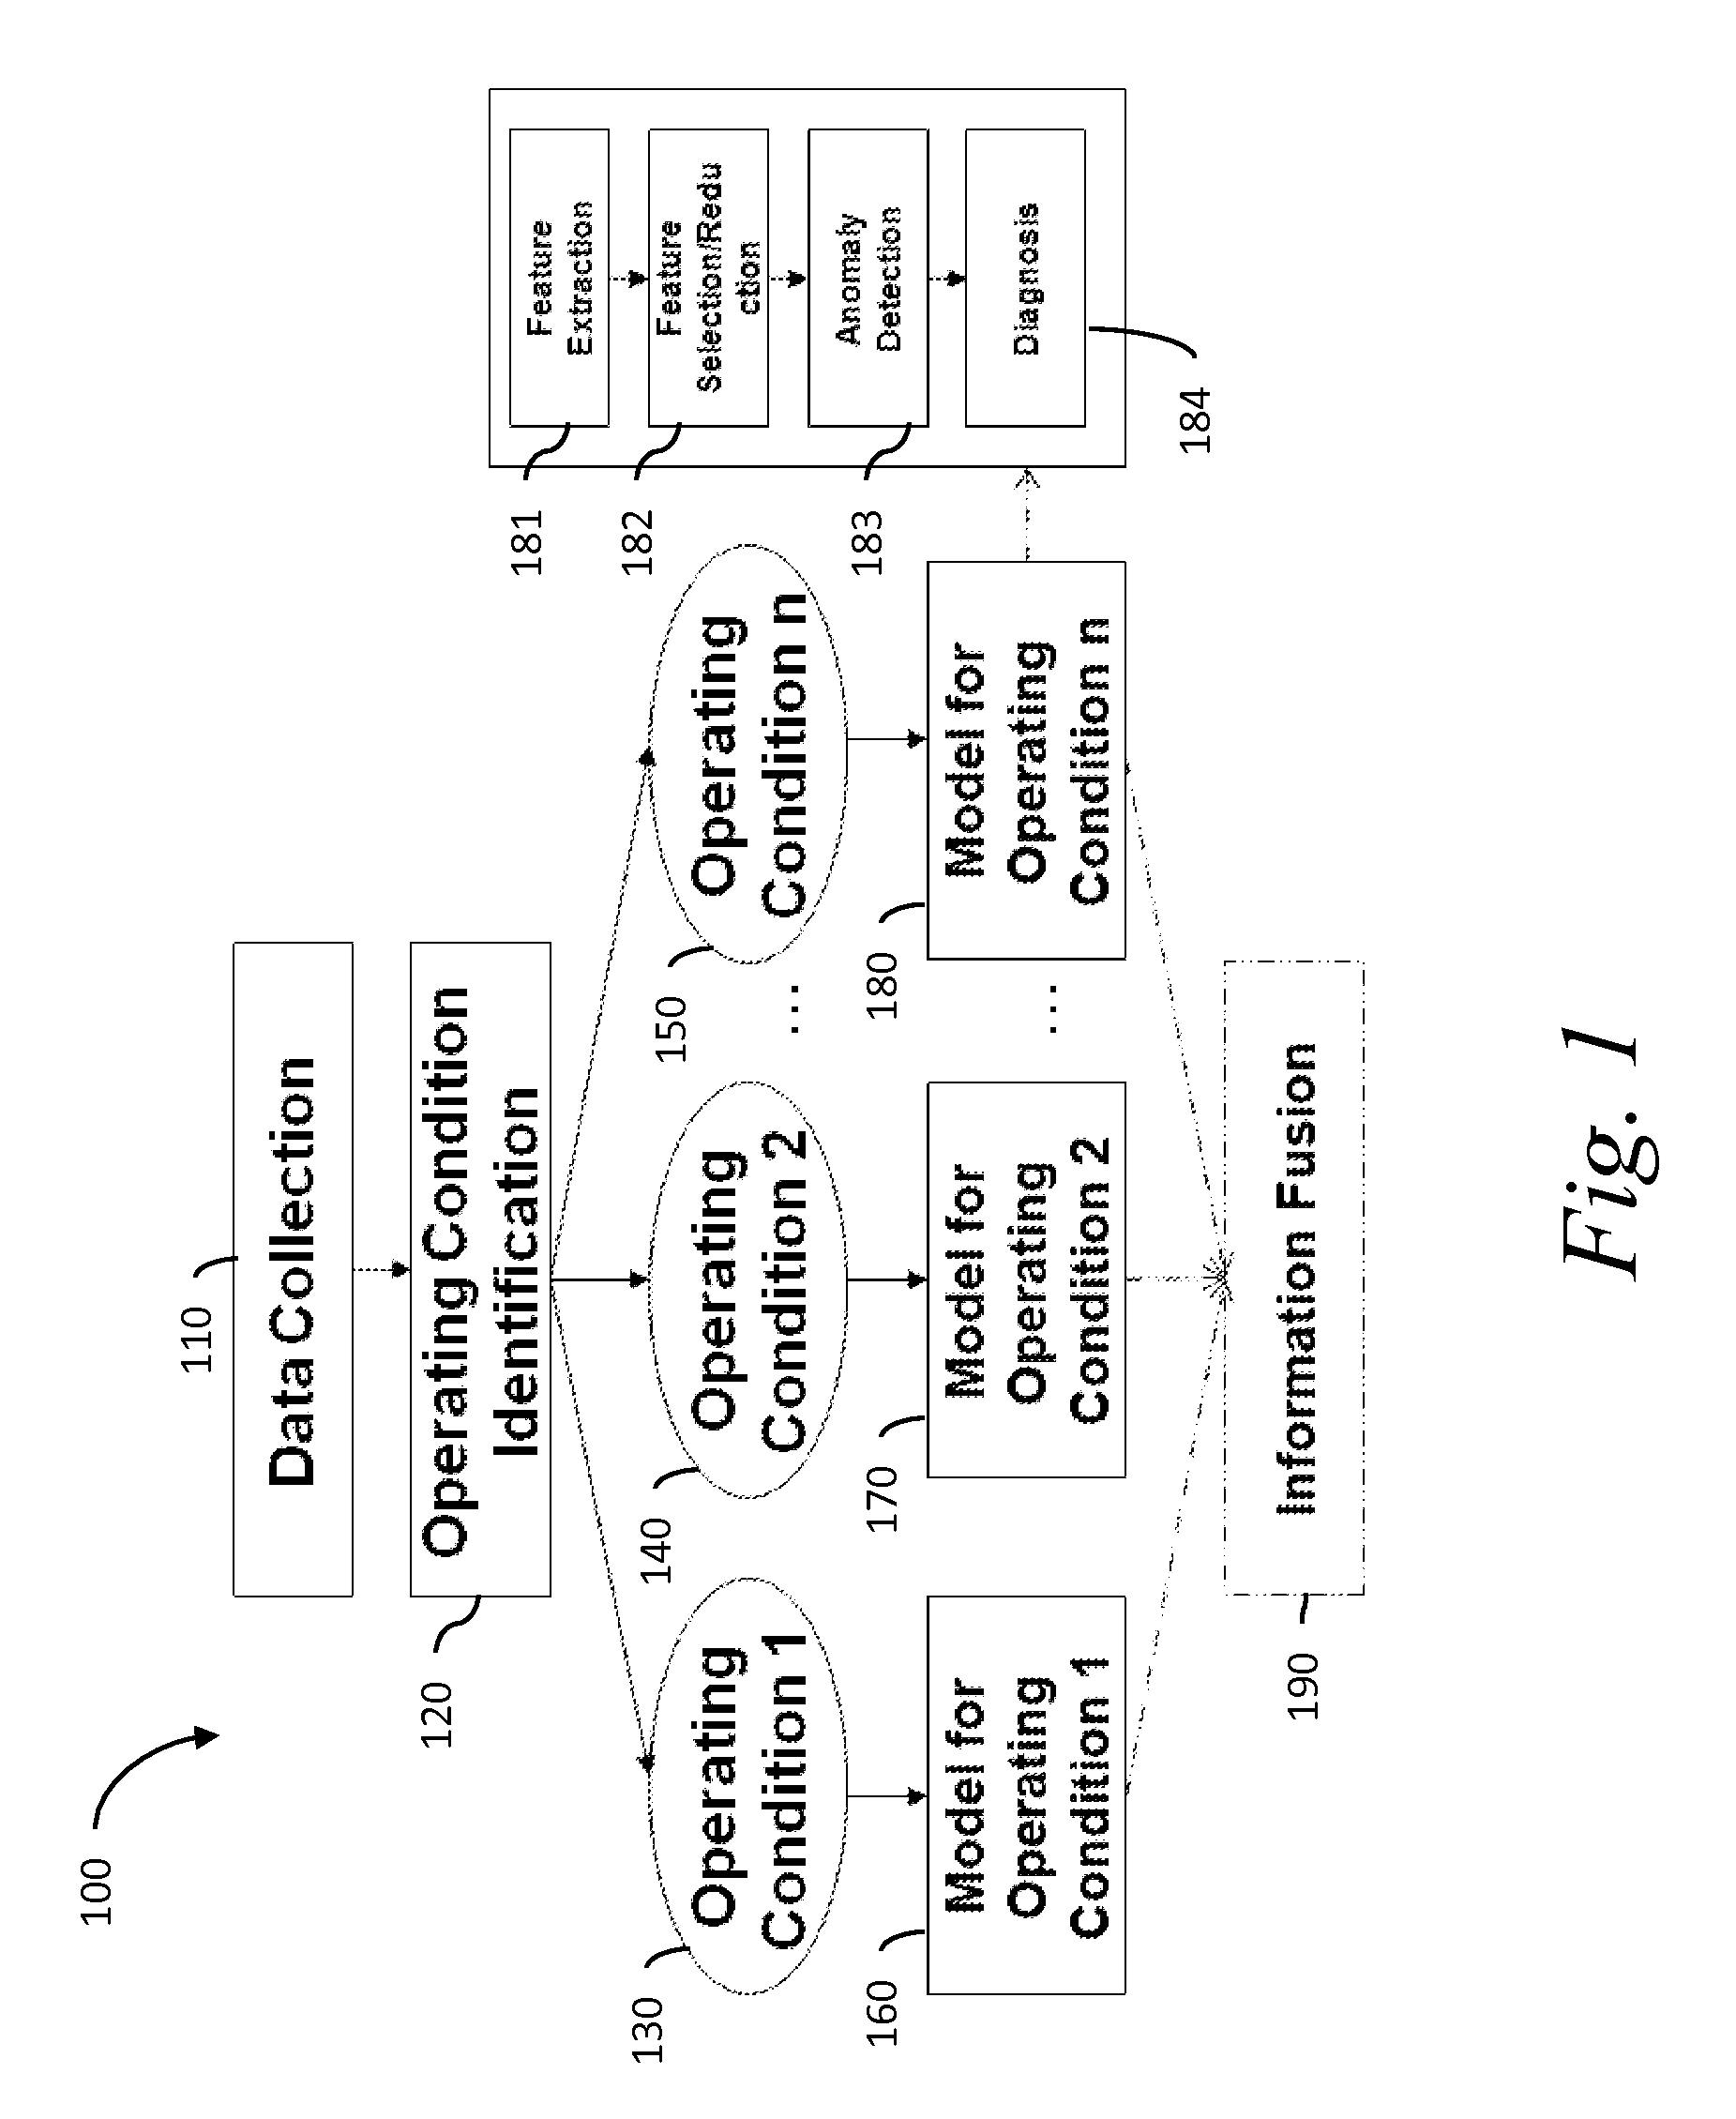 System and method for diagnosing machine tool component faults